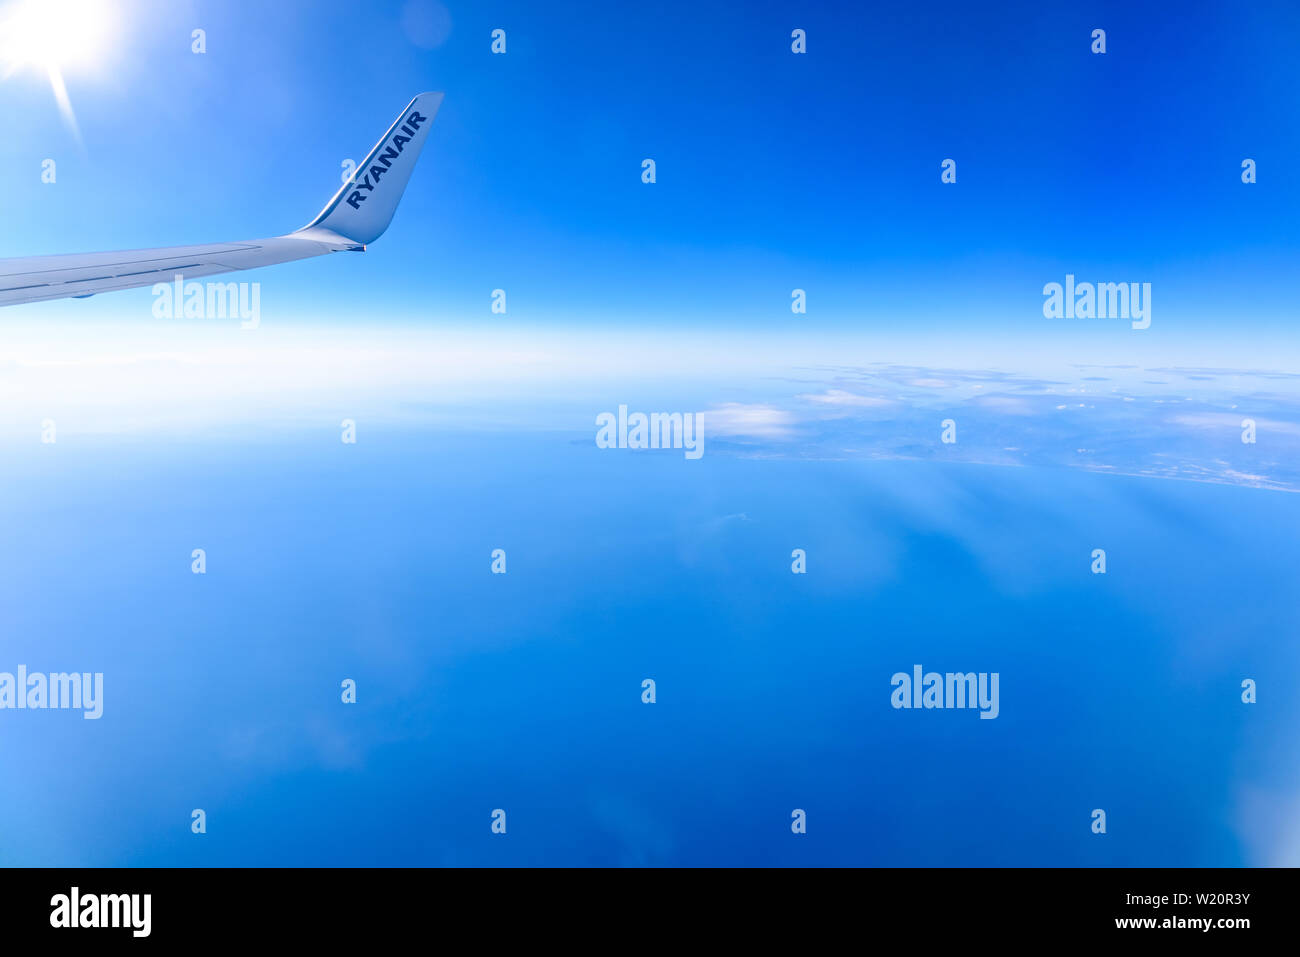 Valencia, Spain - March 8, 2019: Flaps of an Ryanair airplane seen from inside during a flight over the clouds of the sky. Stock Photo